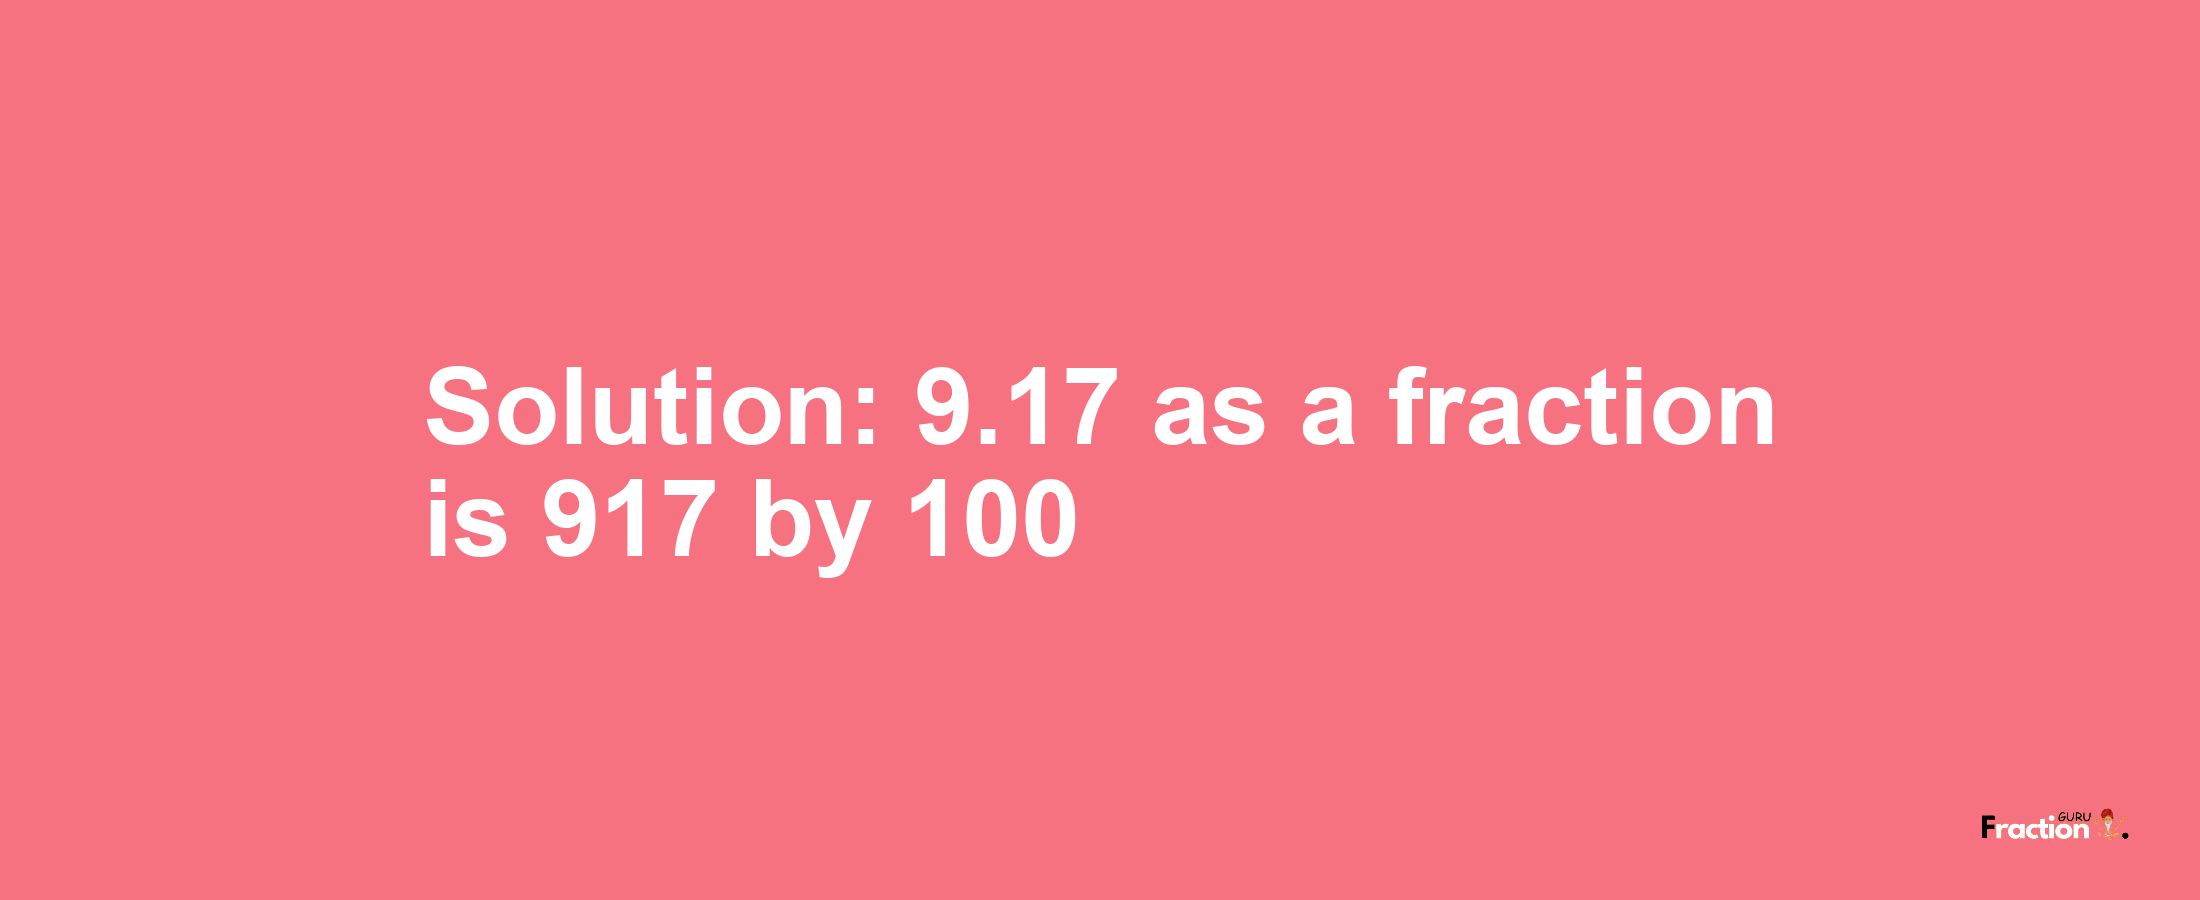 Solution:9.17 as a fraction is 917/100